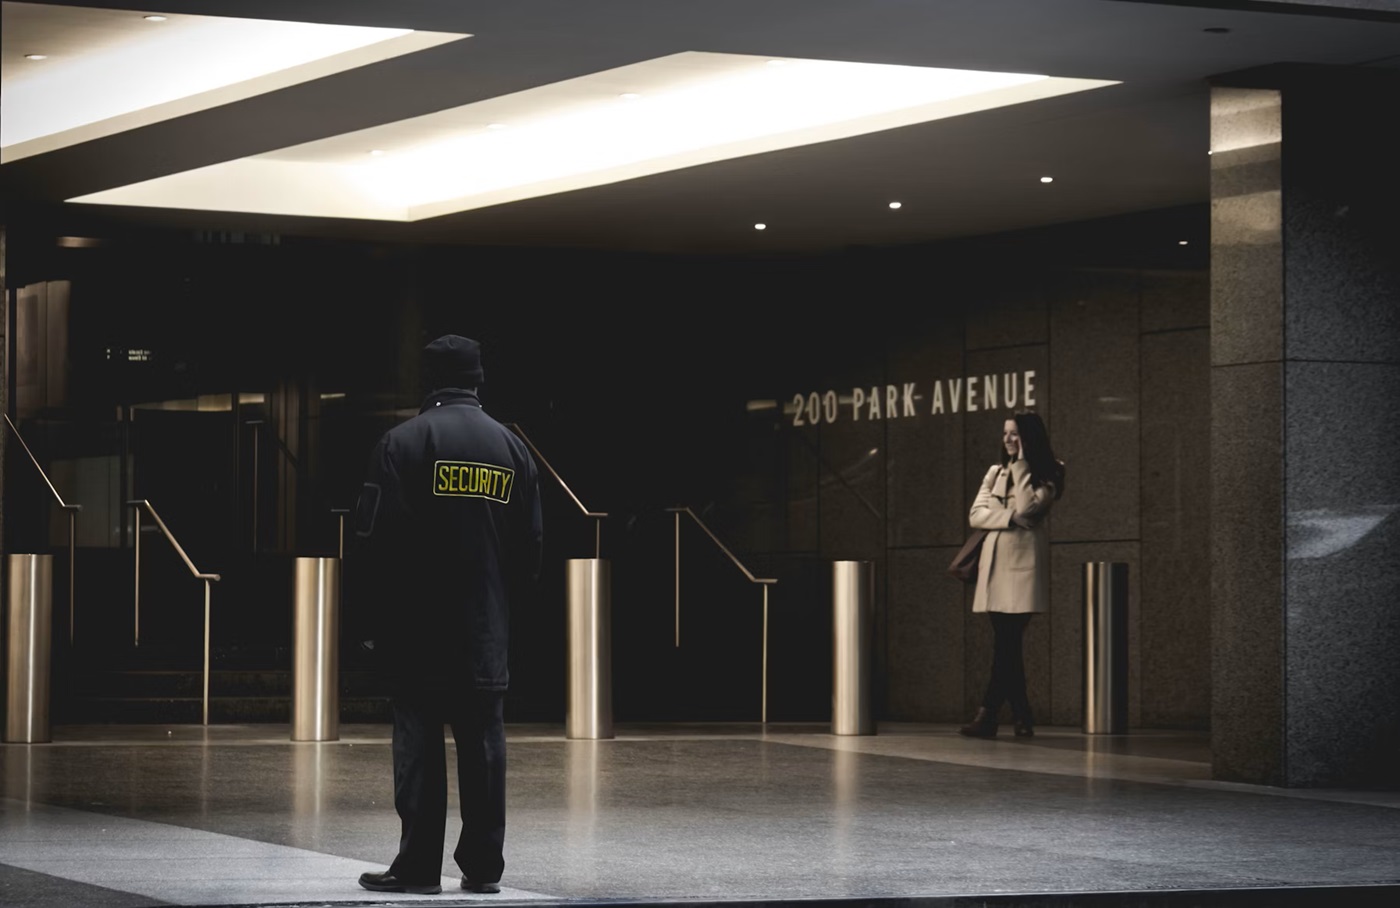 Training and Certification Requirements for Security Guards